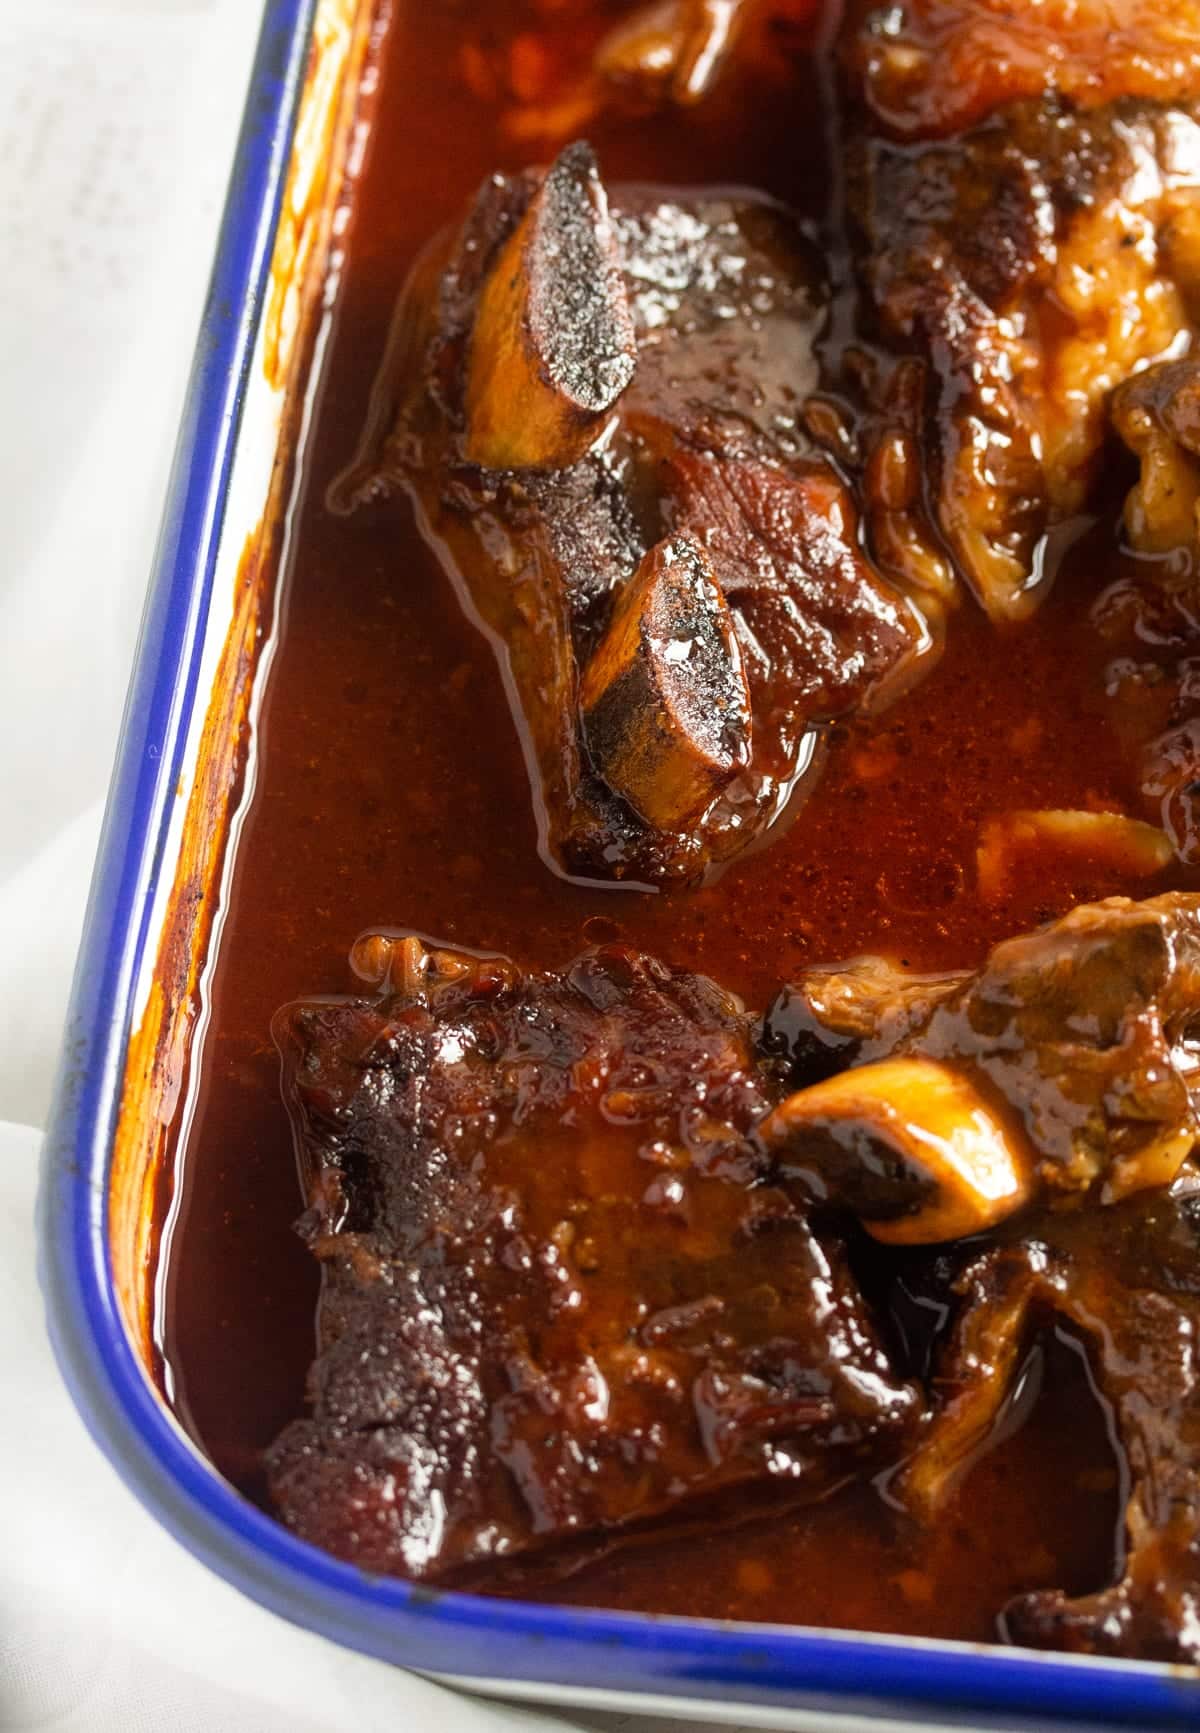 slow cooked beef ribs in the oven with bbq sauce.